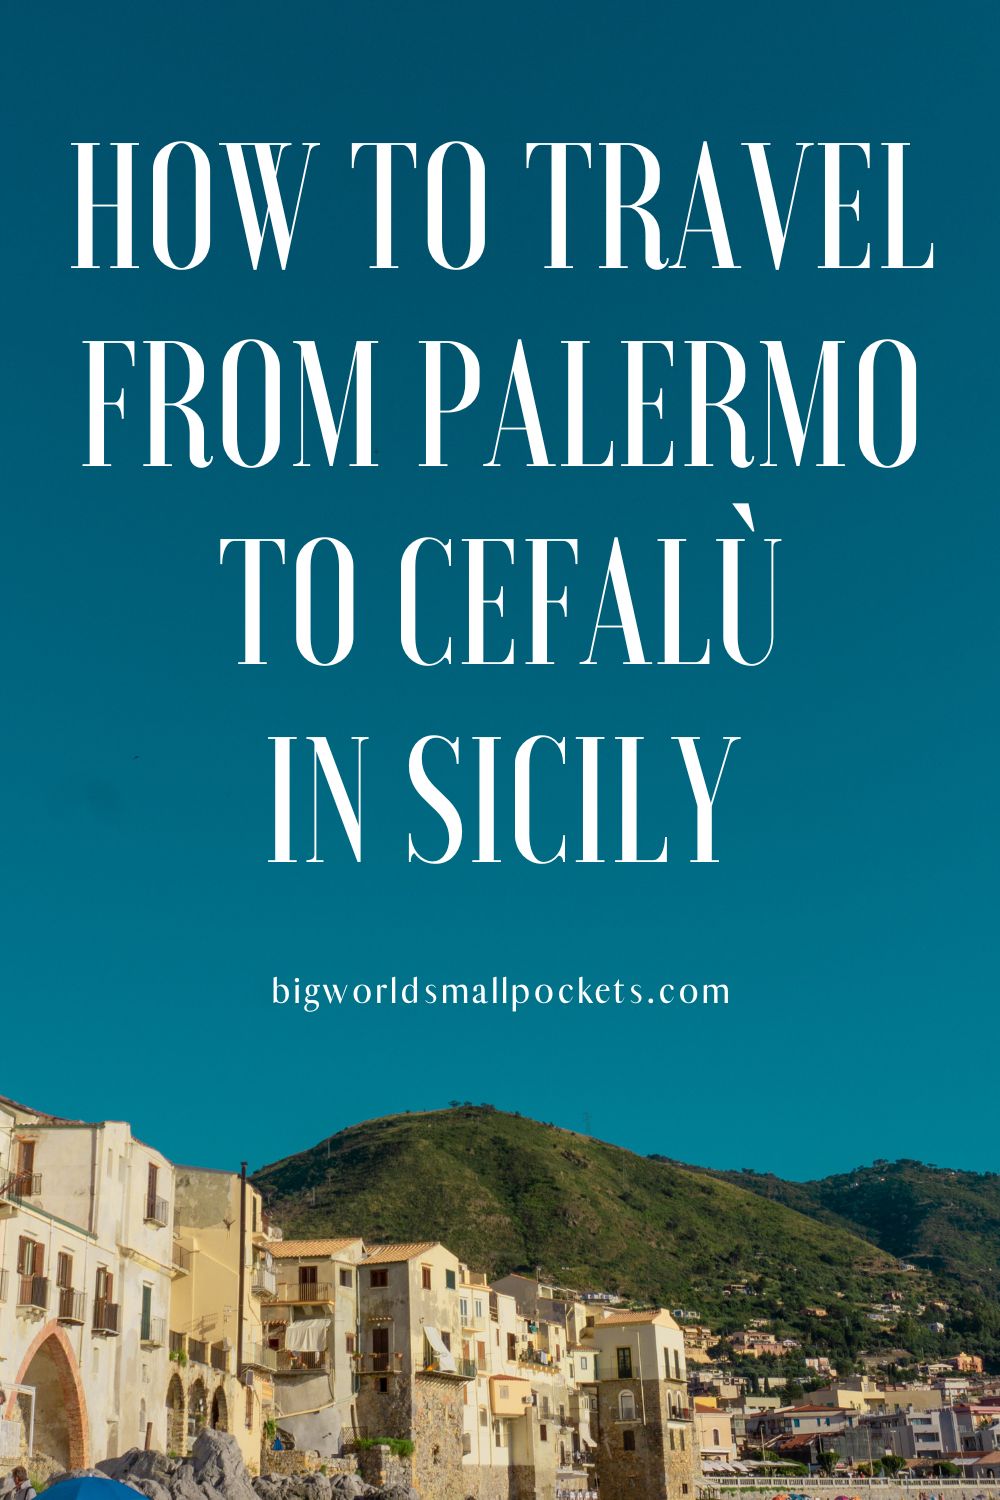 How to Travel from Palermo to Cefalù in Sicily